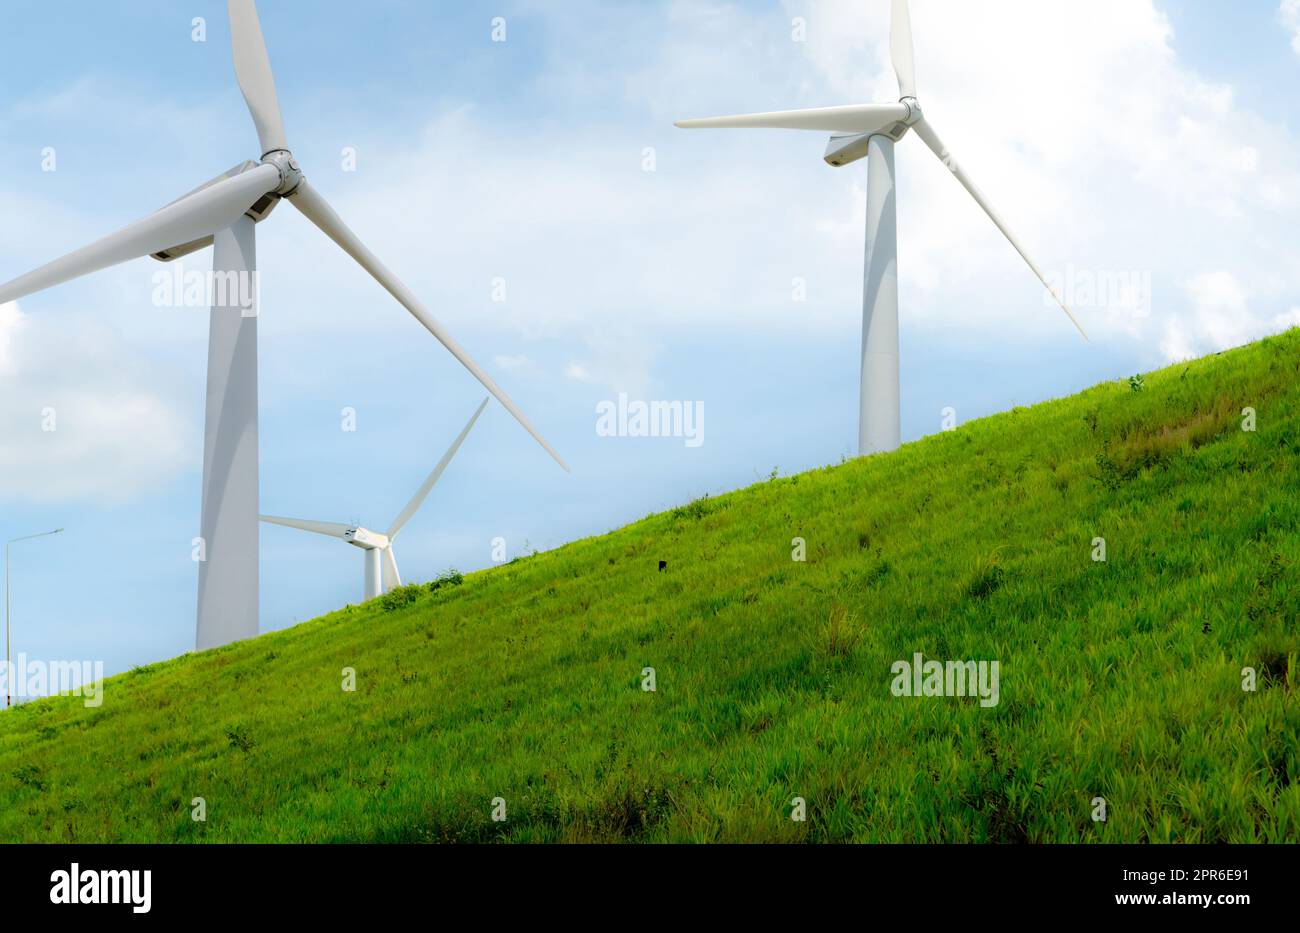 Wind energy. Wind power. Sustainable, renewable energy. Wind turbines generate electricity. Windmill farm with blue sky. Renewable resource. Sustainable development. Global energy crisis concept. Stock Photo